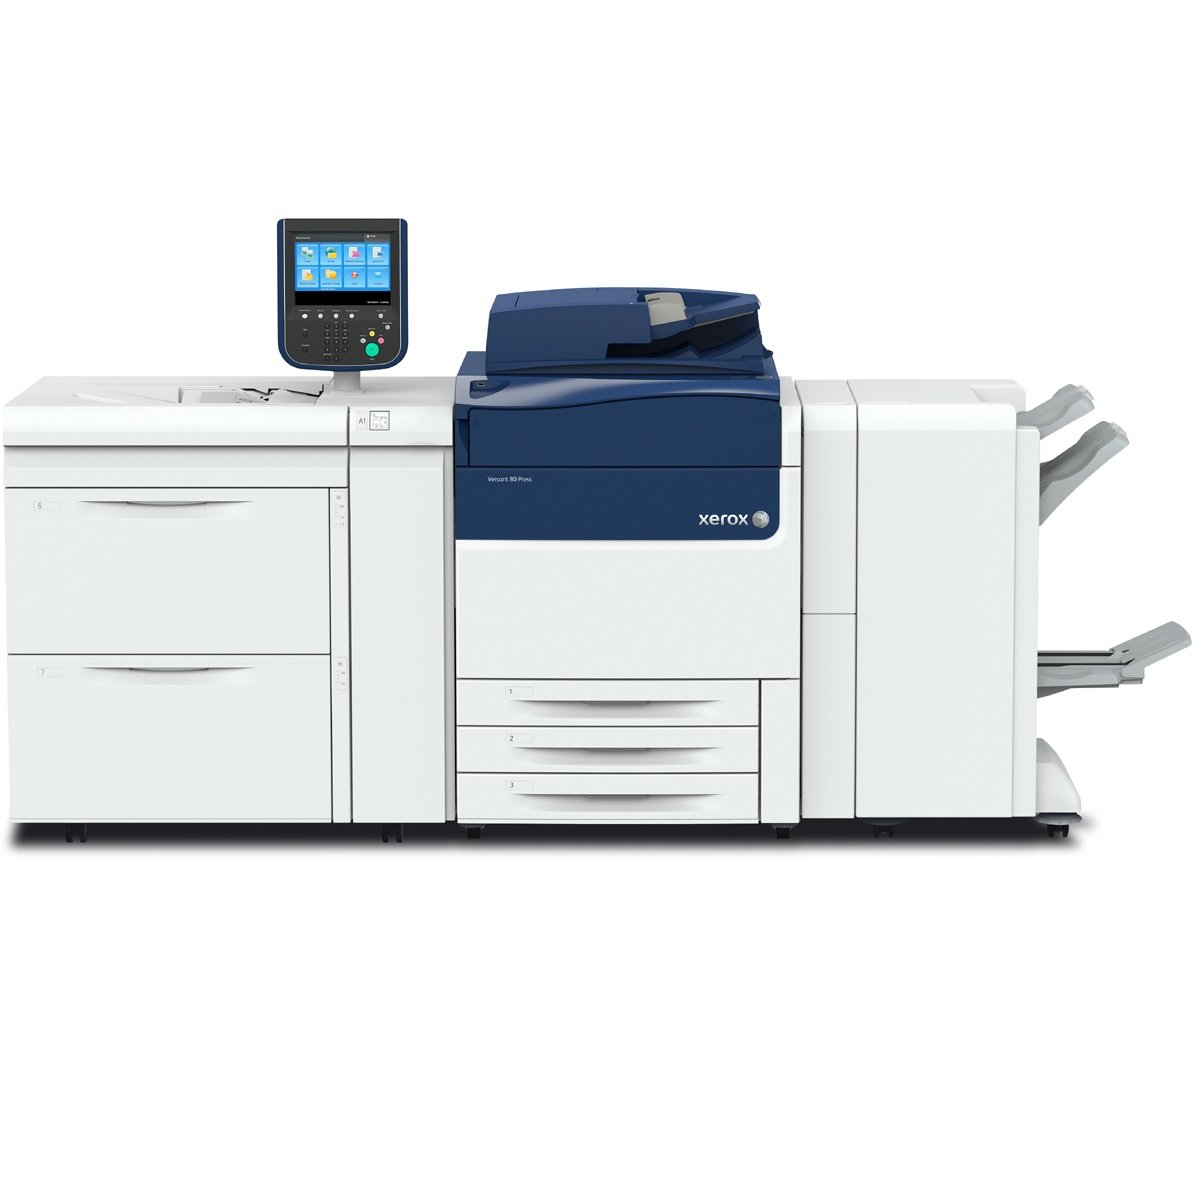 Absolute Toner $199/Month Xerox Versant 80 Very Low Count Digital Press Color Production Printer Copier Scanner, High Capacity Feeder, Workstation Fiery, LCT, Booklet Maker Showroom Color Copiers